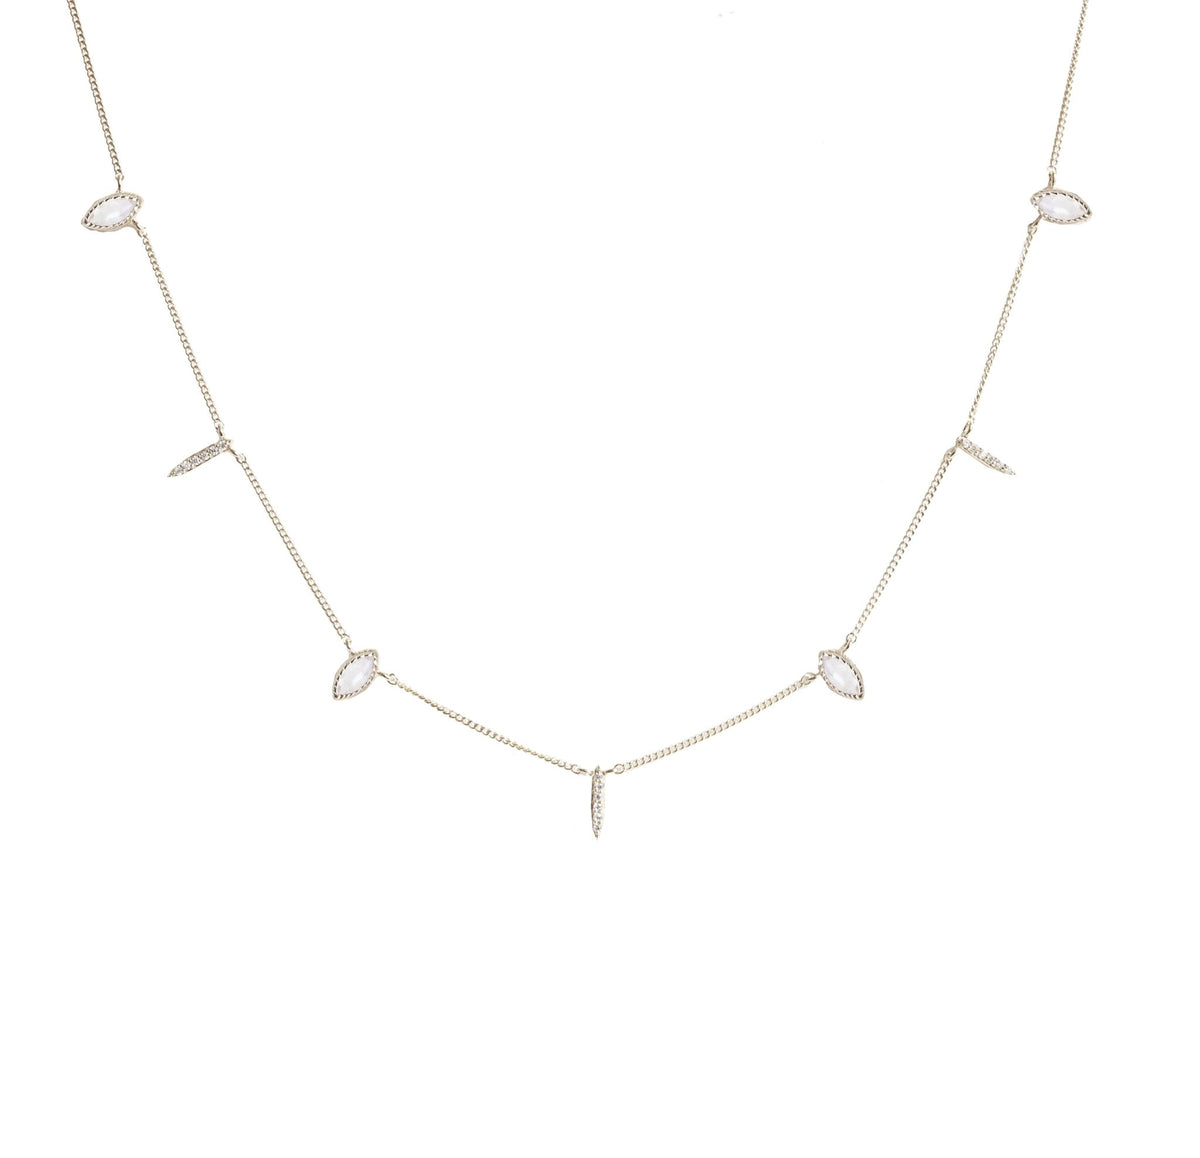 DREAM STARDUST RAINBOW MOONSTONE, CUBIC ZIRCONIA &amp; SILVER SHORT NECKLACE - SO PRETTY CARA COTTER